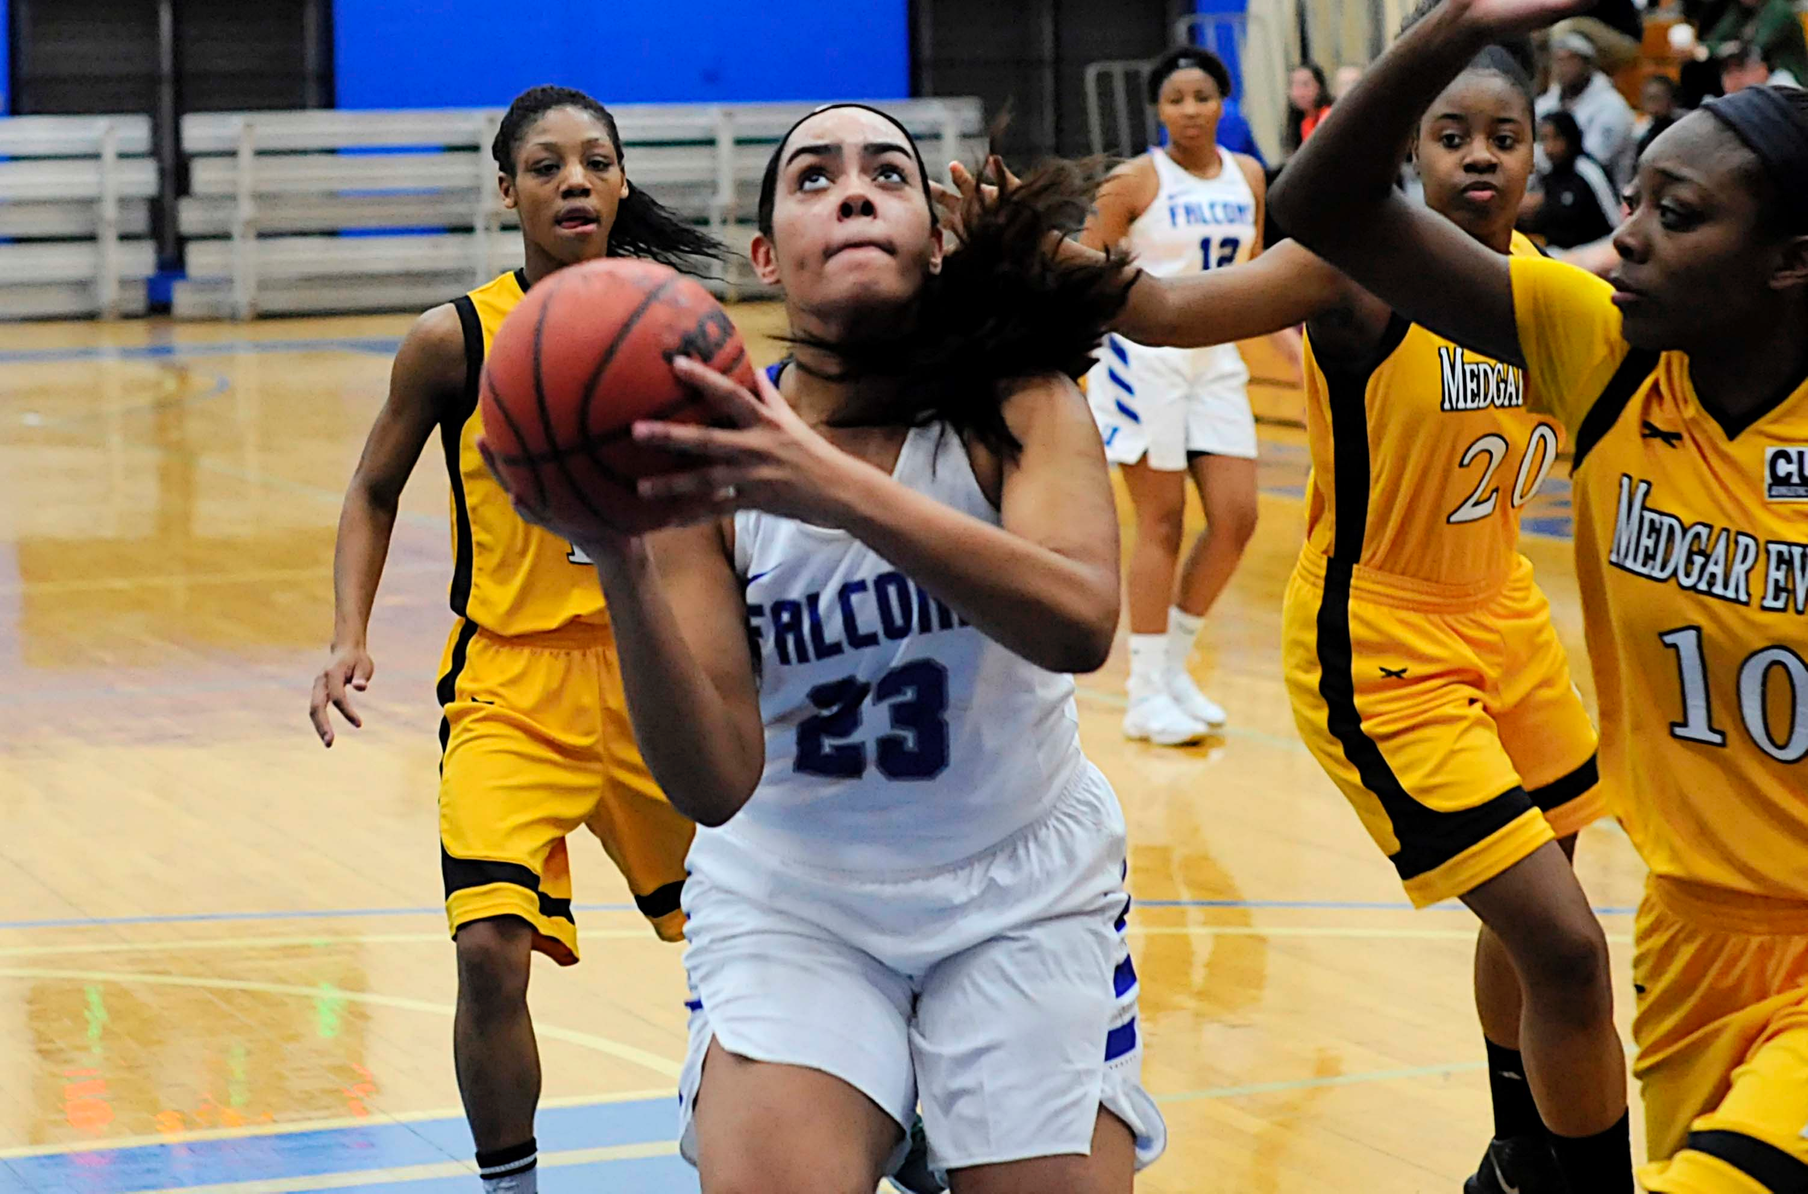 Women's Basketball Loses at Saint Joseph's (Me.) in the GNAC Quarterfinals